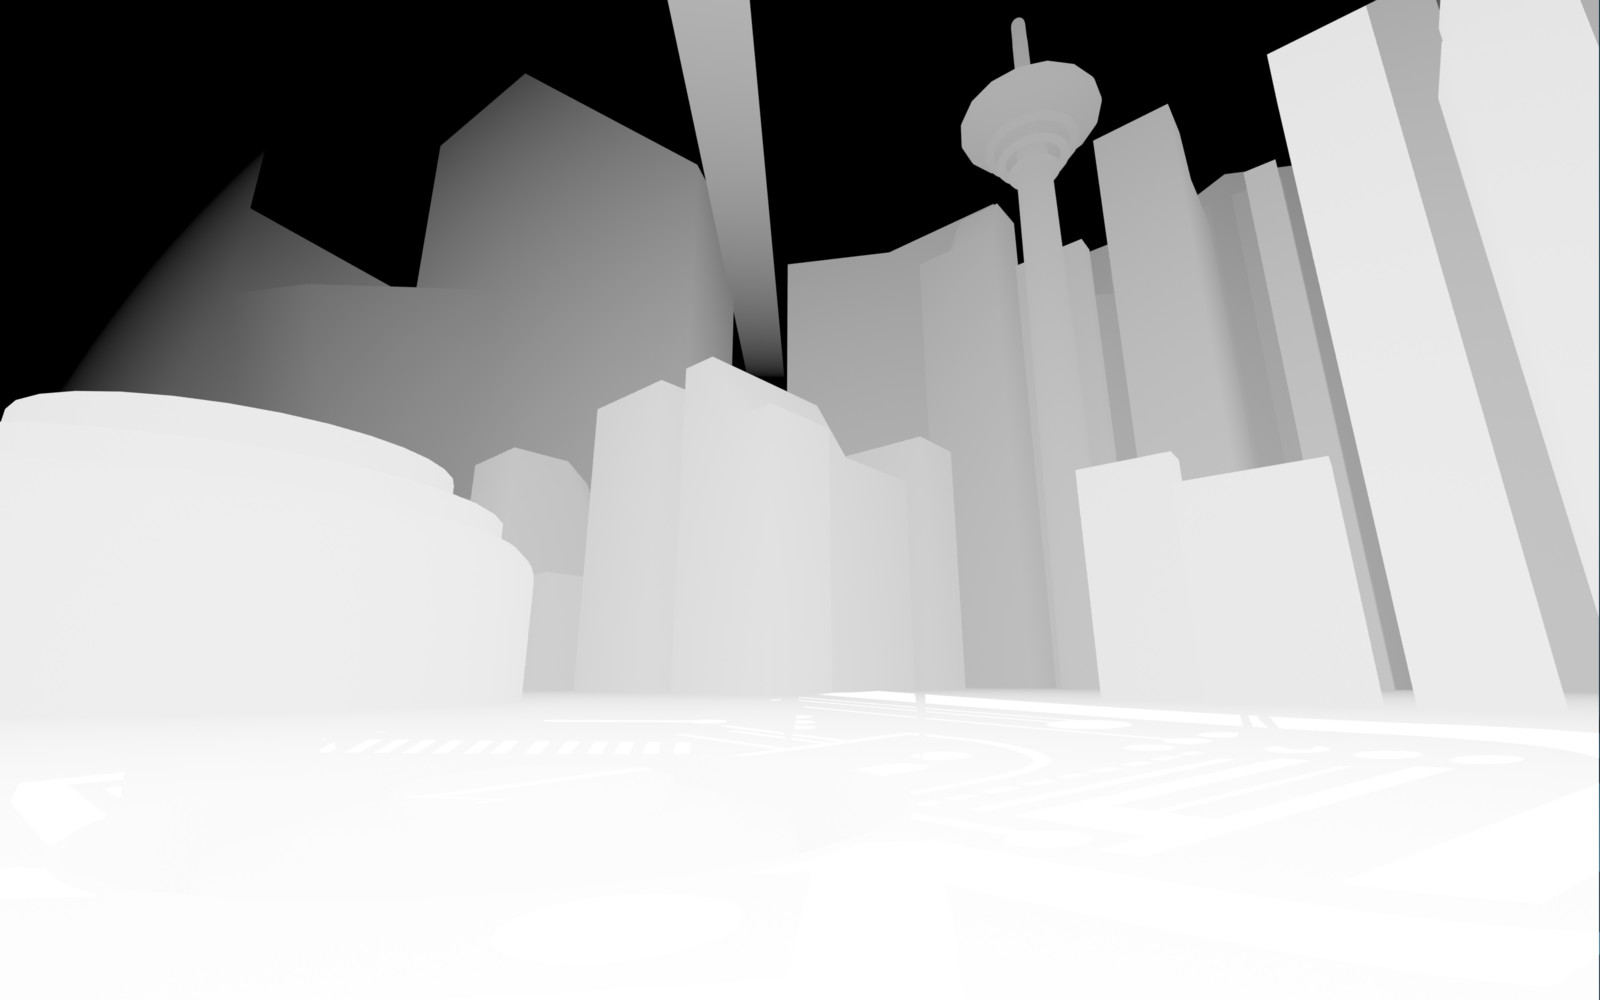 A ZDepth render for masking and atmospheric perspective